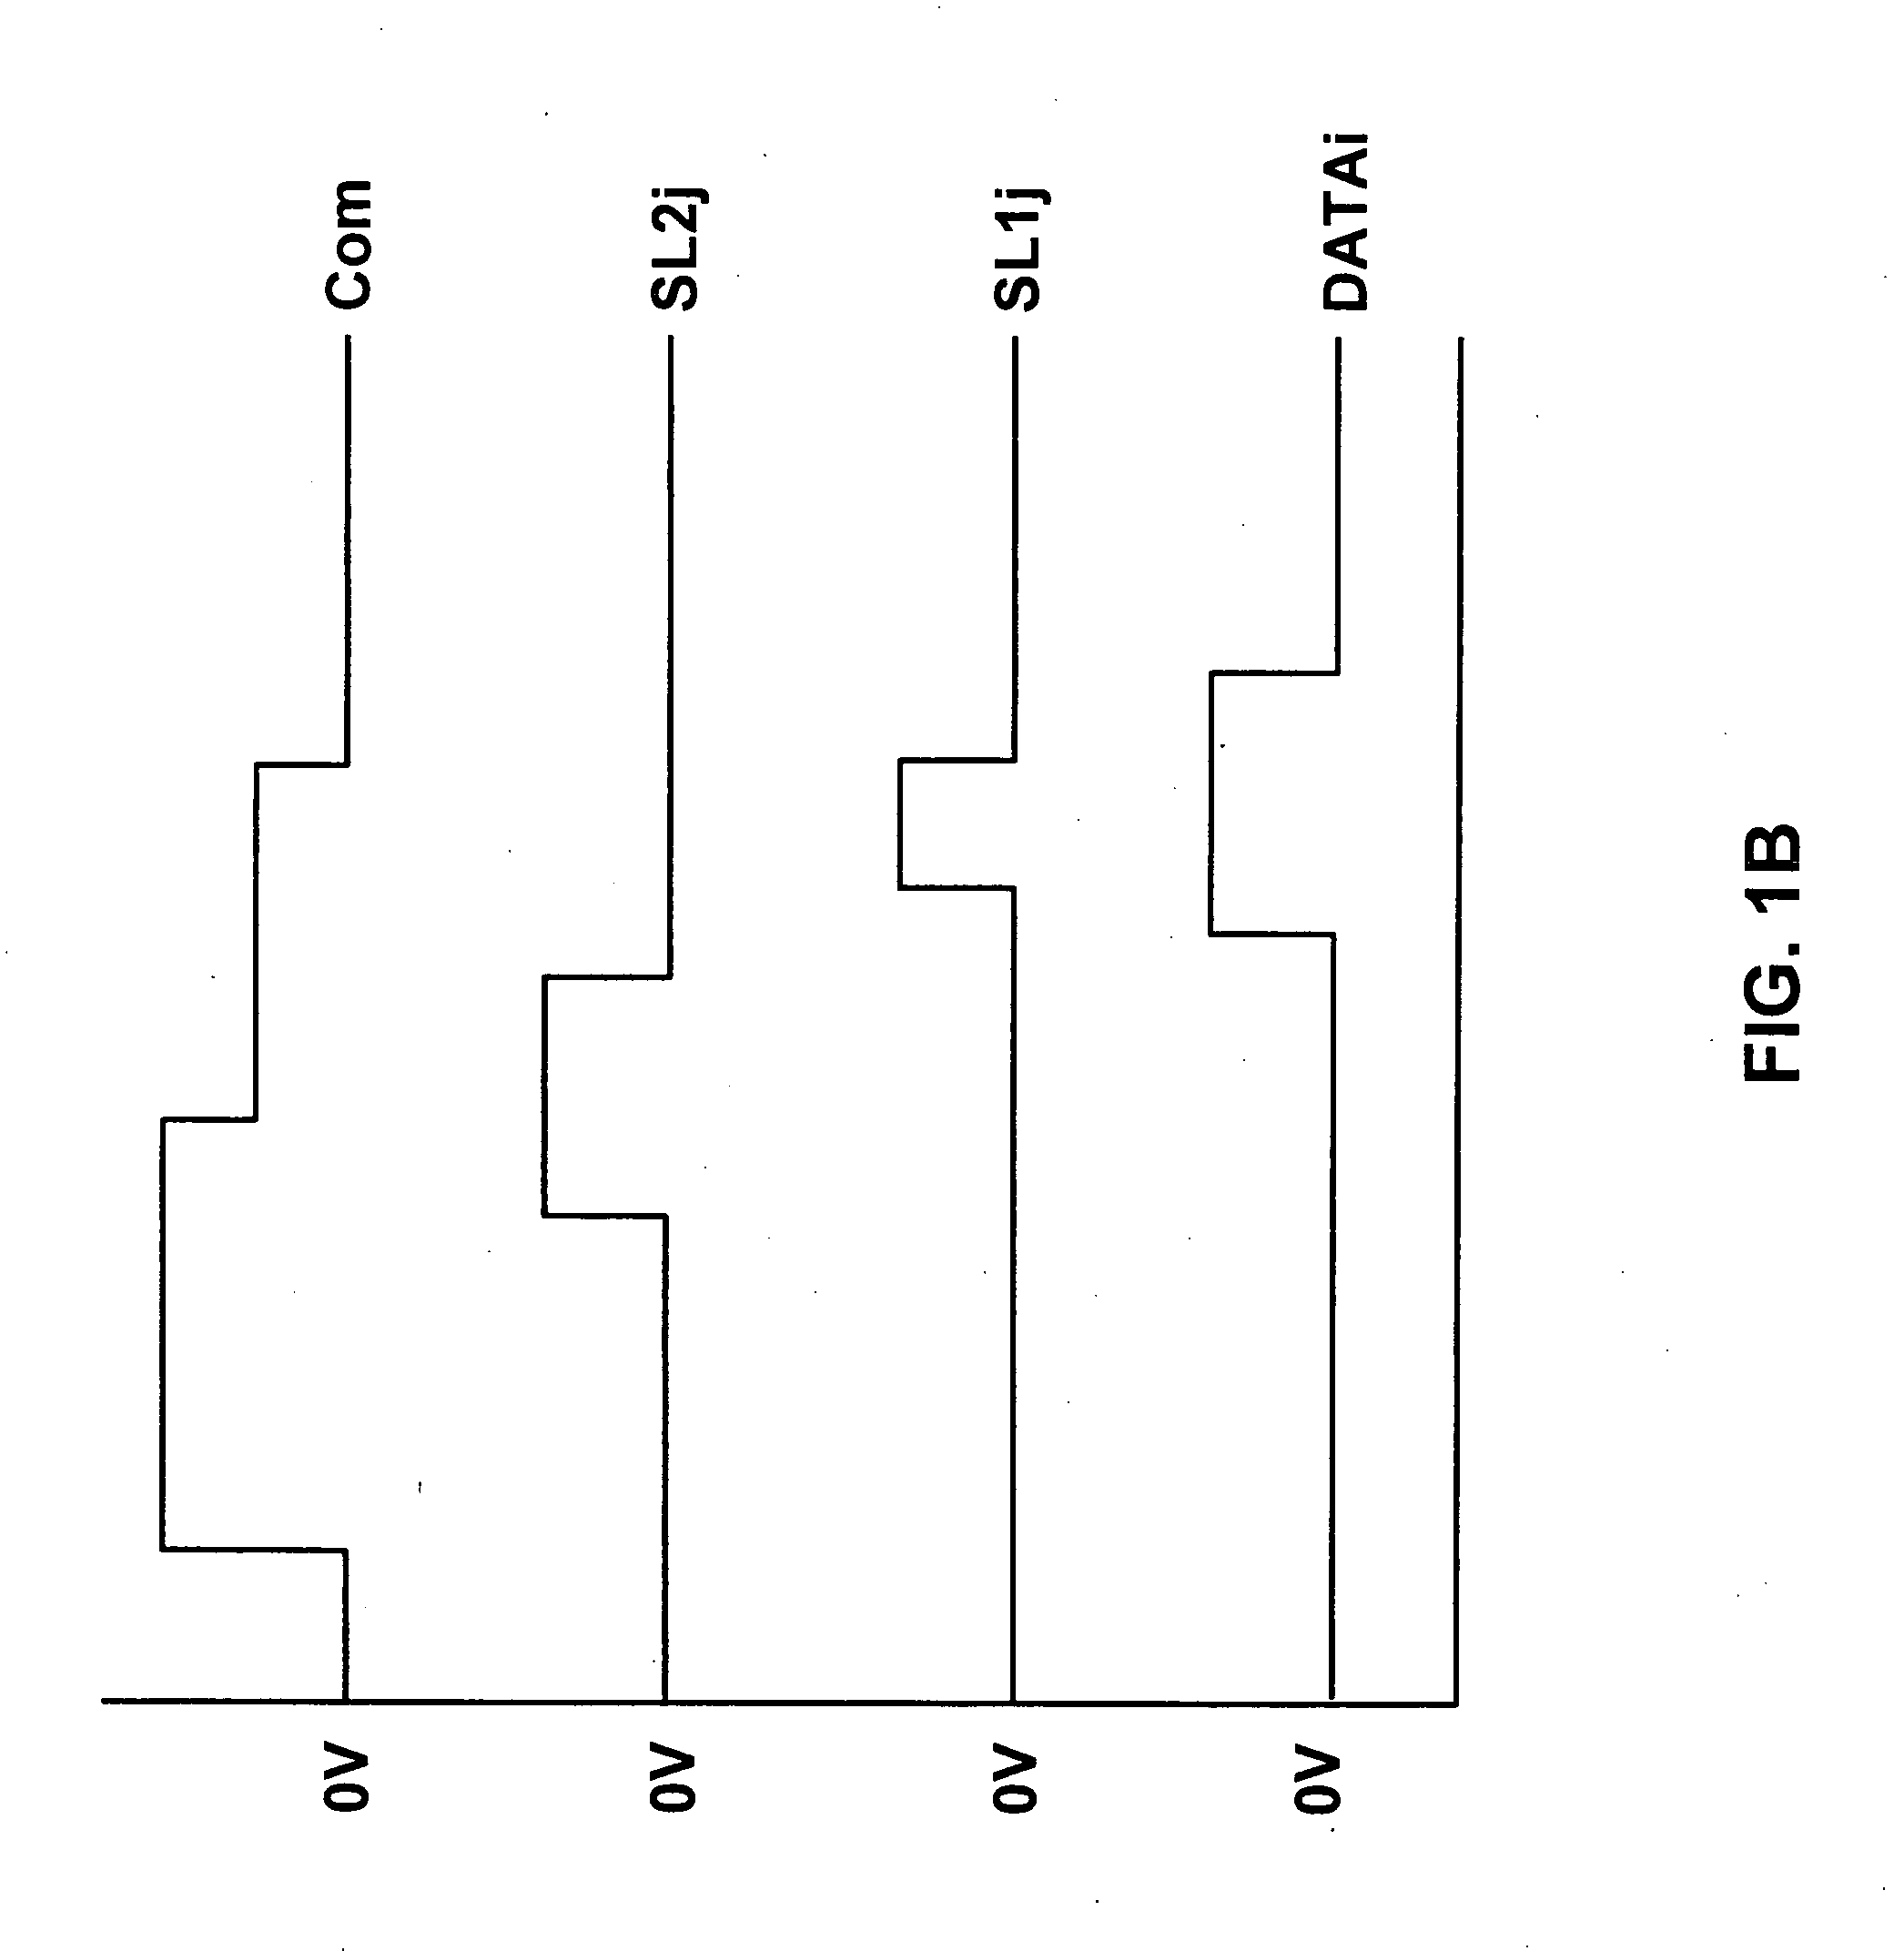 Organic light emitting diode circuit having voltage compensation function and method for compensating